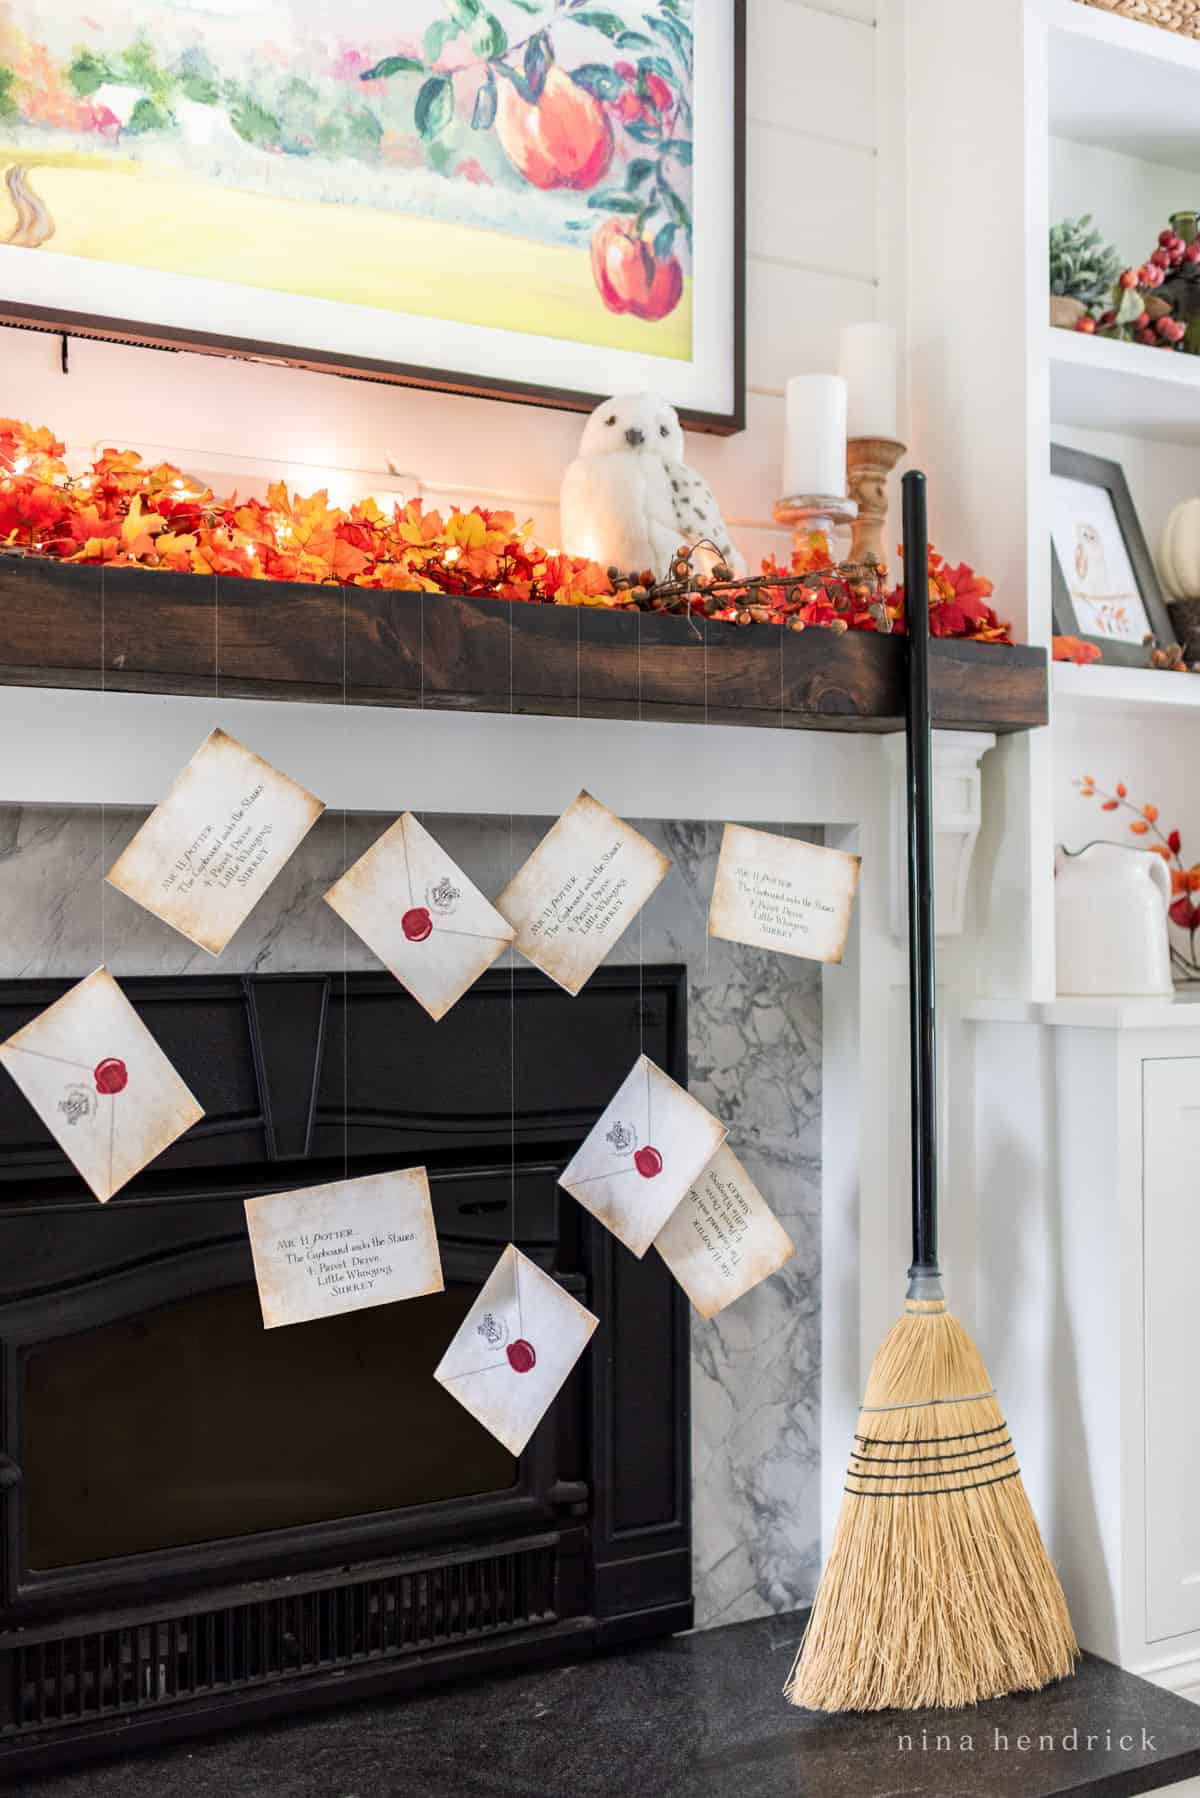 Hogwarts letters hanging from the fireplace for Halloween. 